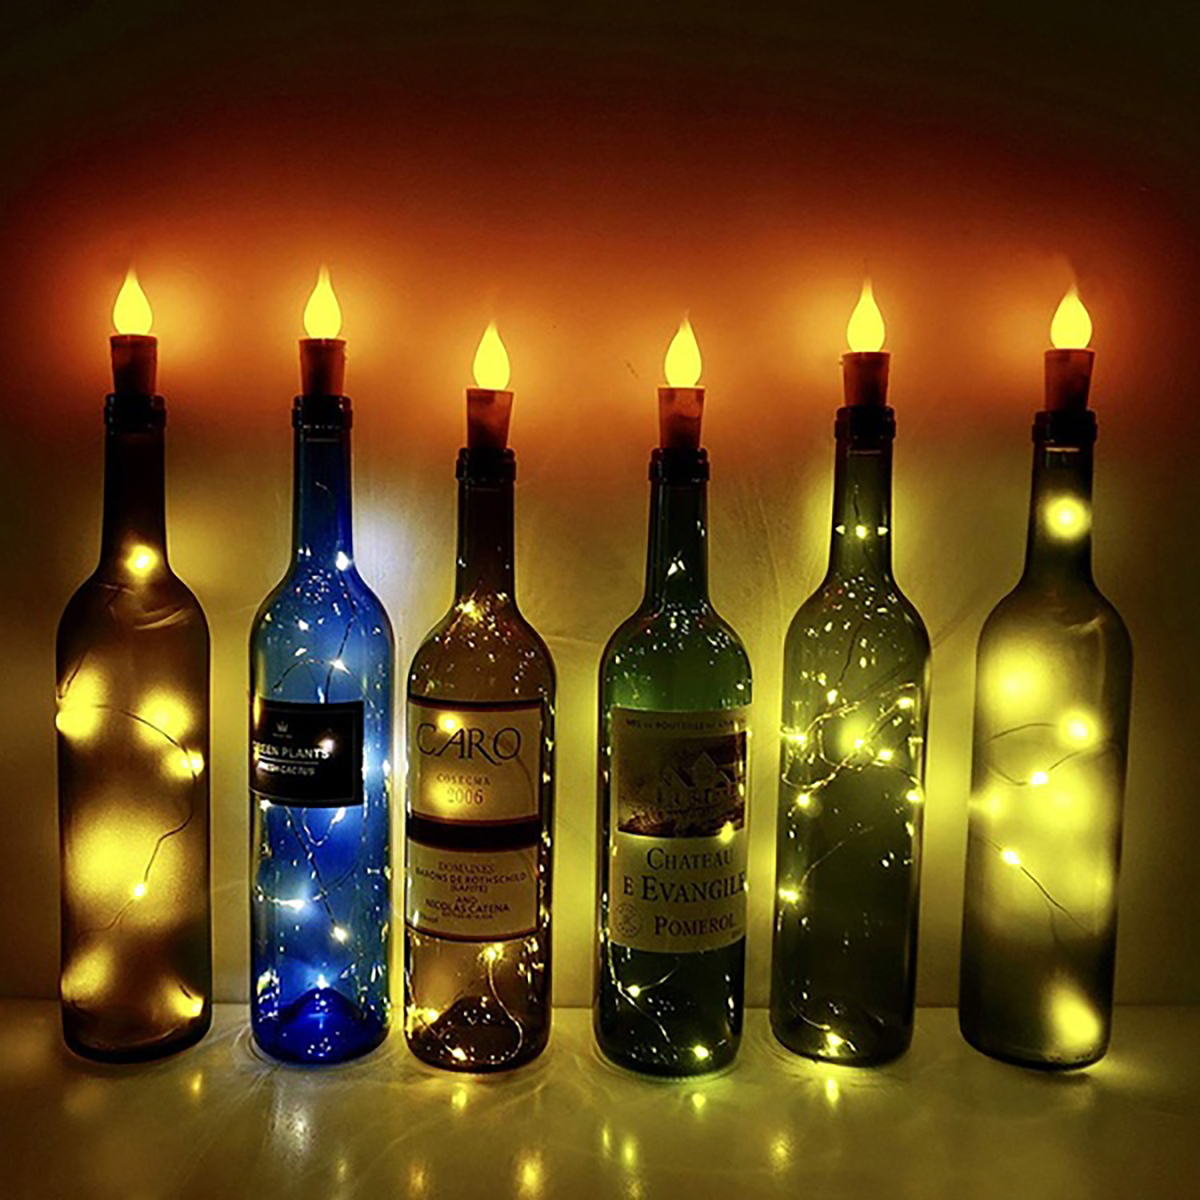 

5PCS Battery Operated Flicker Bottle String Light Warm White Cork Shape Copper Wire LED Candle Lamp